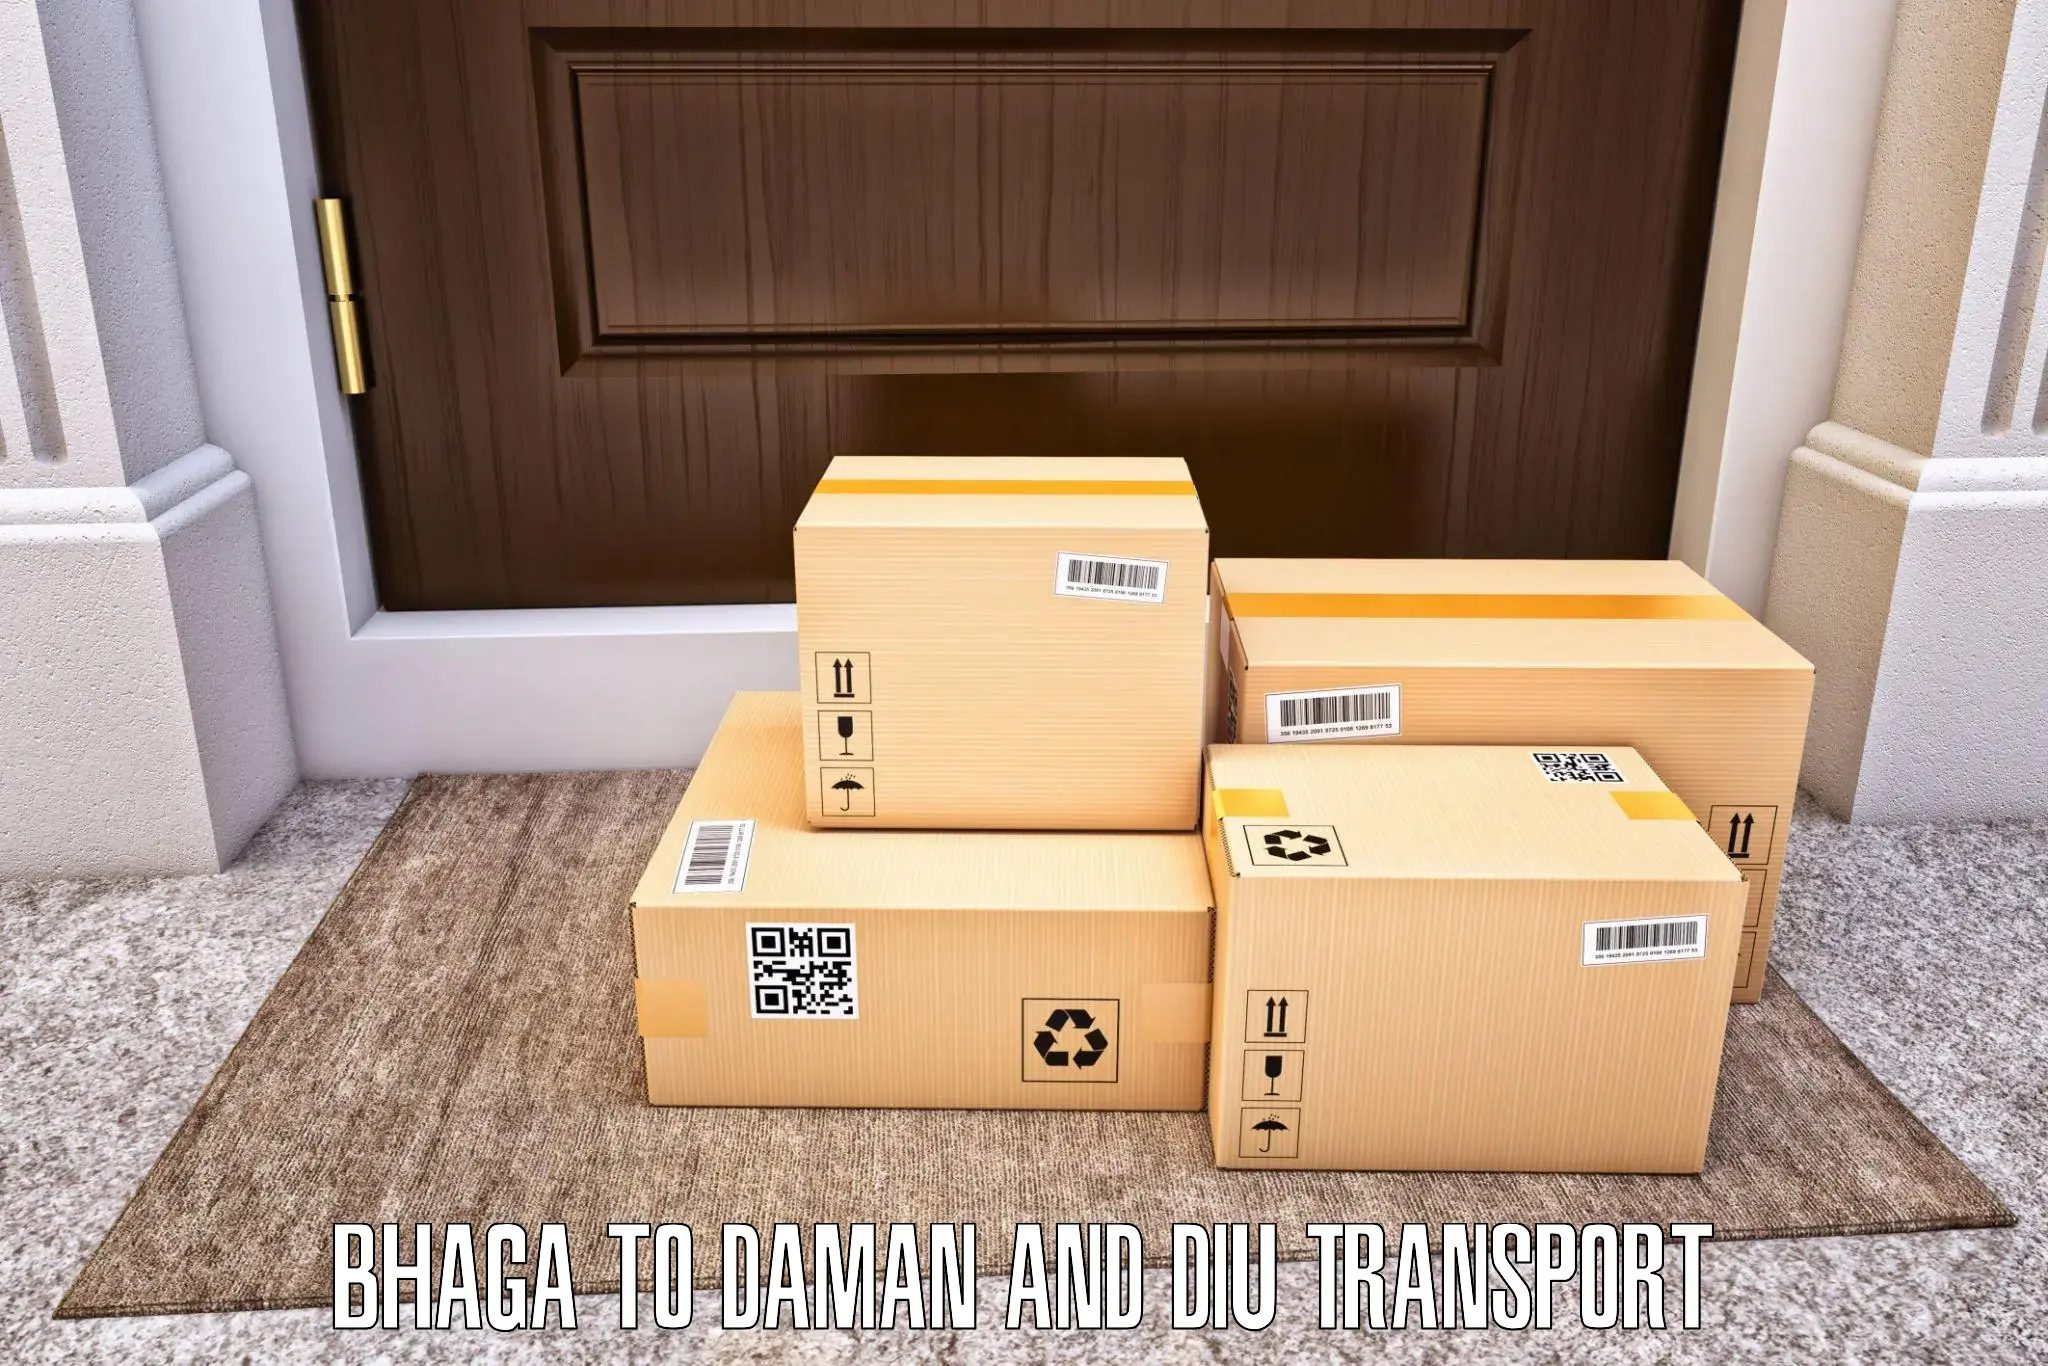 Road transport online services Bhaga to Daman and Diu